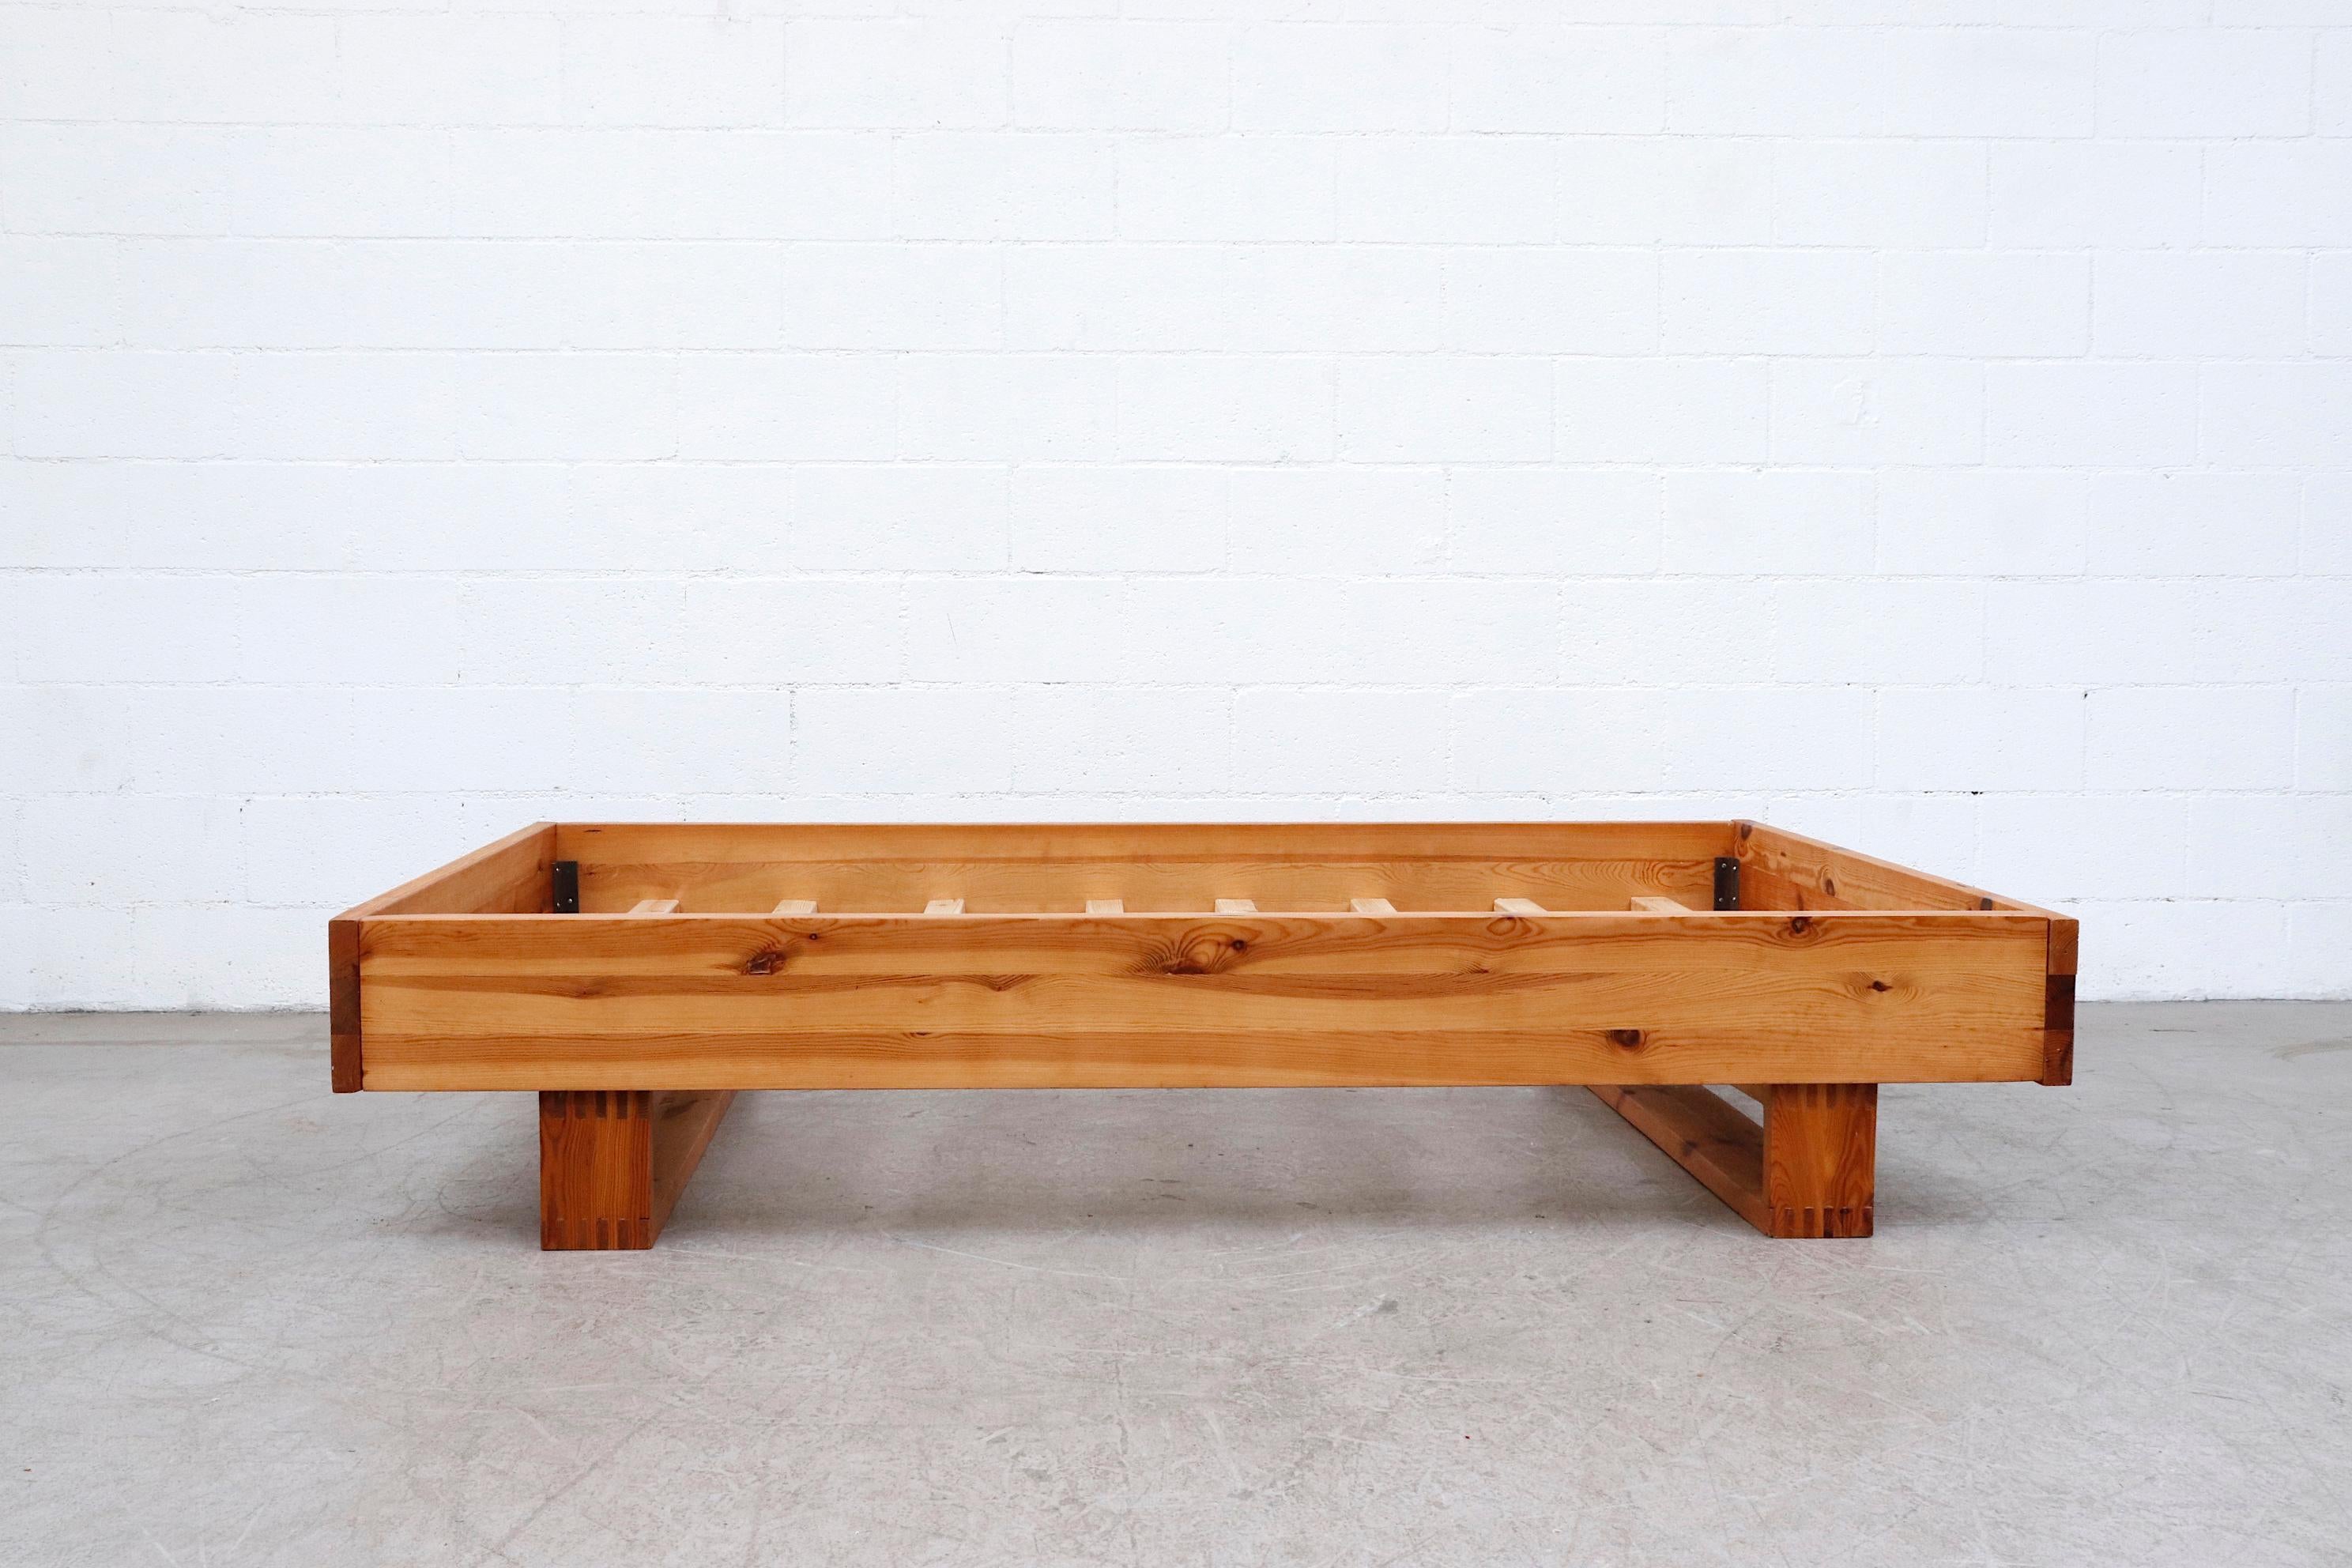 Low and Sleak Ate Van Apeldoorn full size platform pine bed frame with natural wood slat supports. Frame is lightly refinished with wear consistent with it's age and use. Other Apeldoorn bed frames available. Inside mm are 55